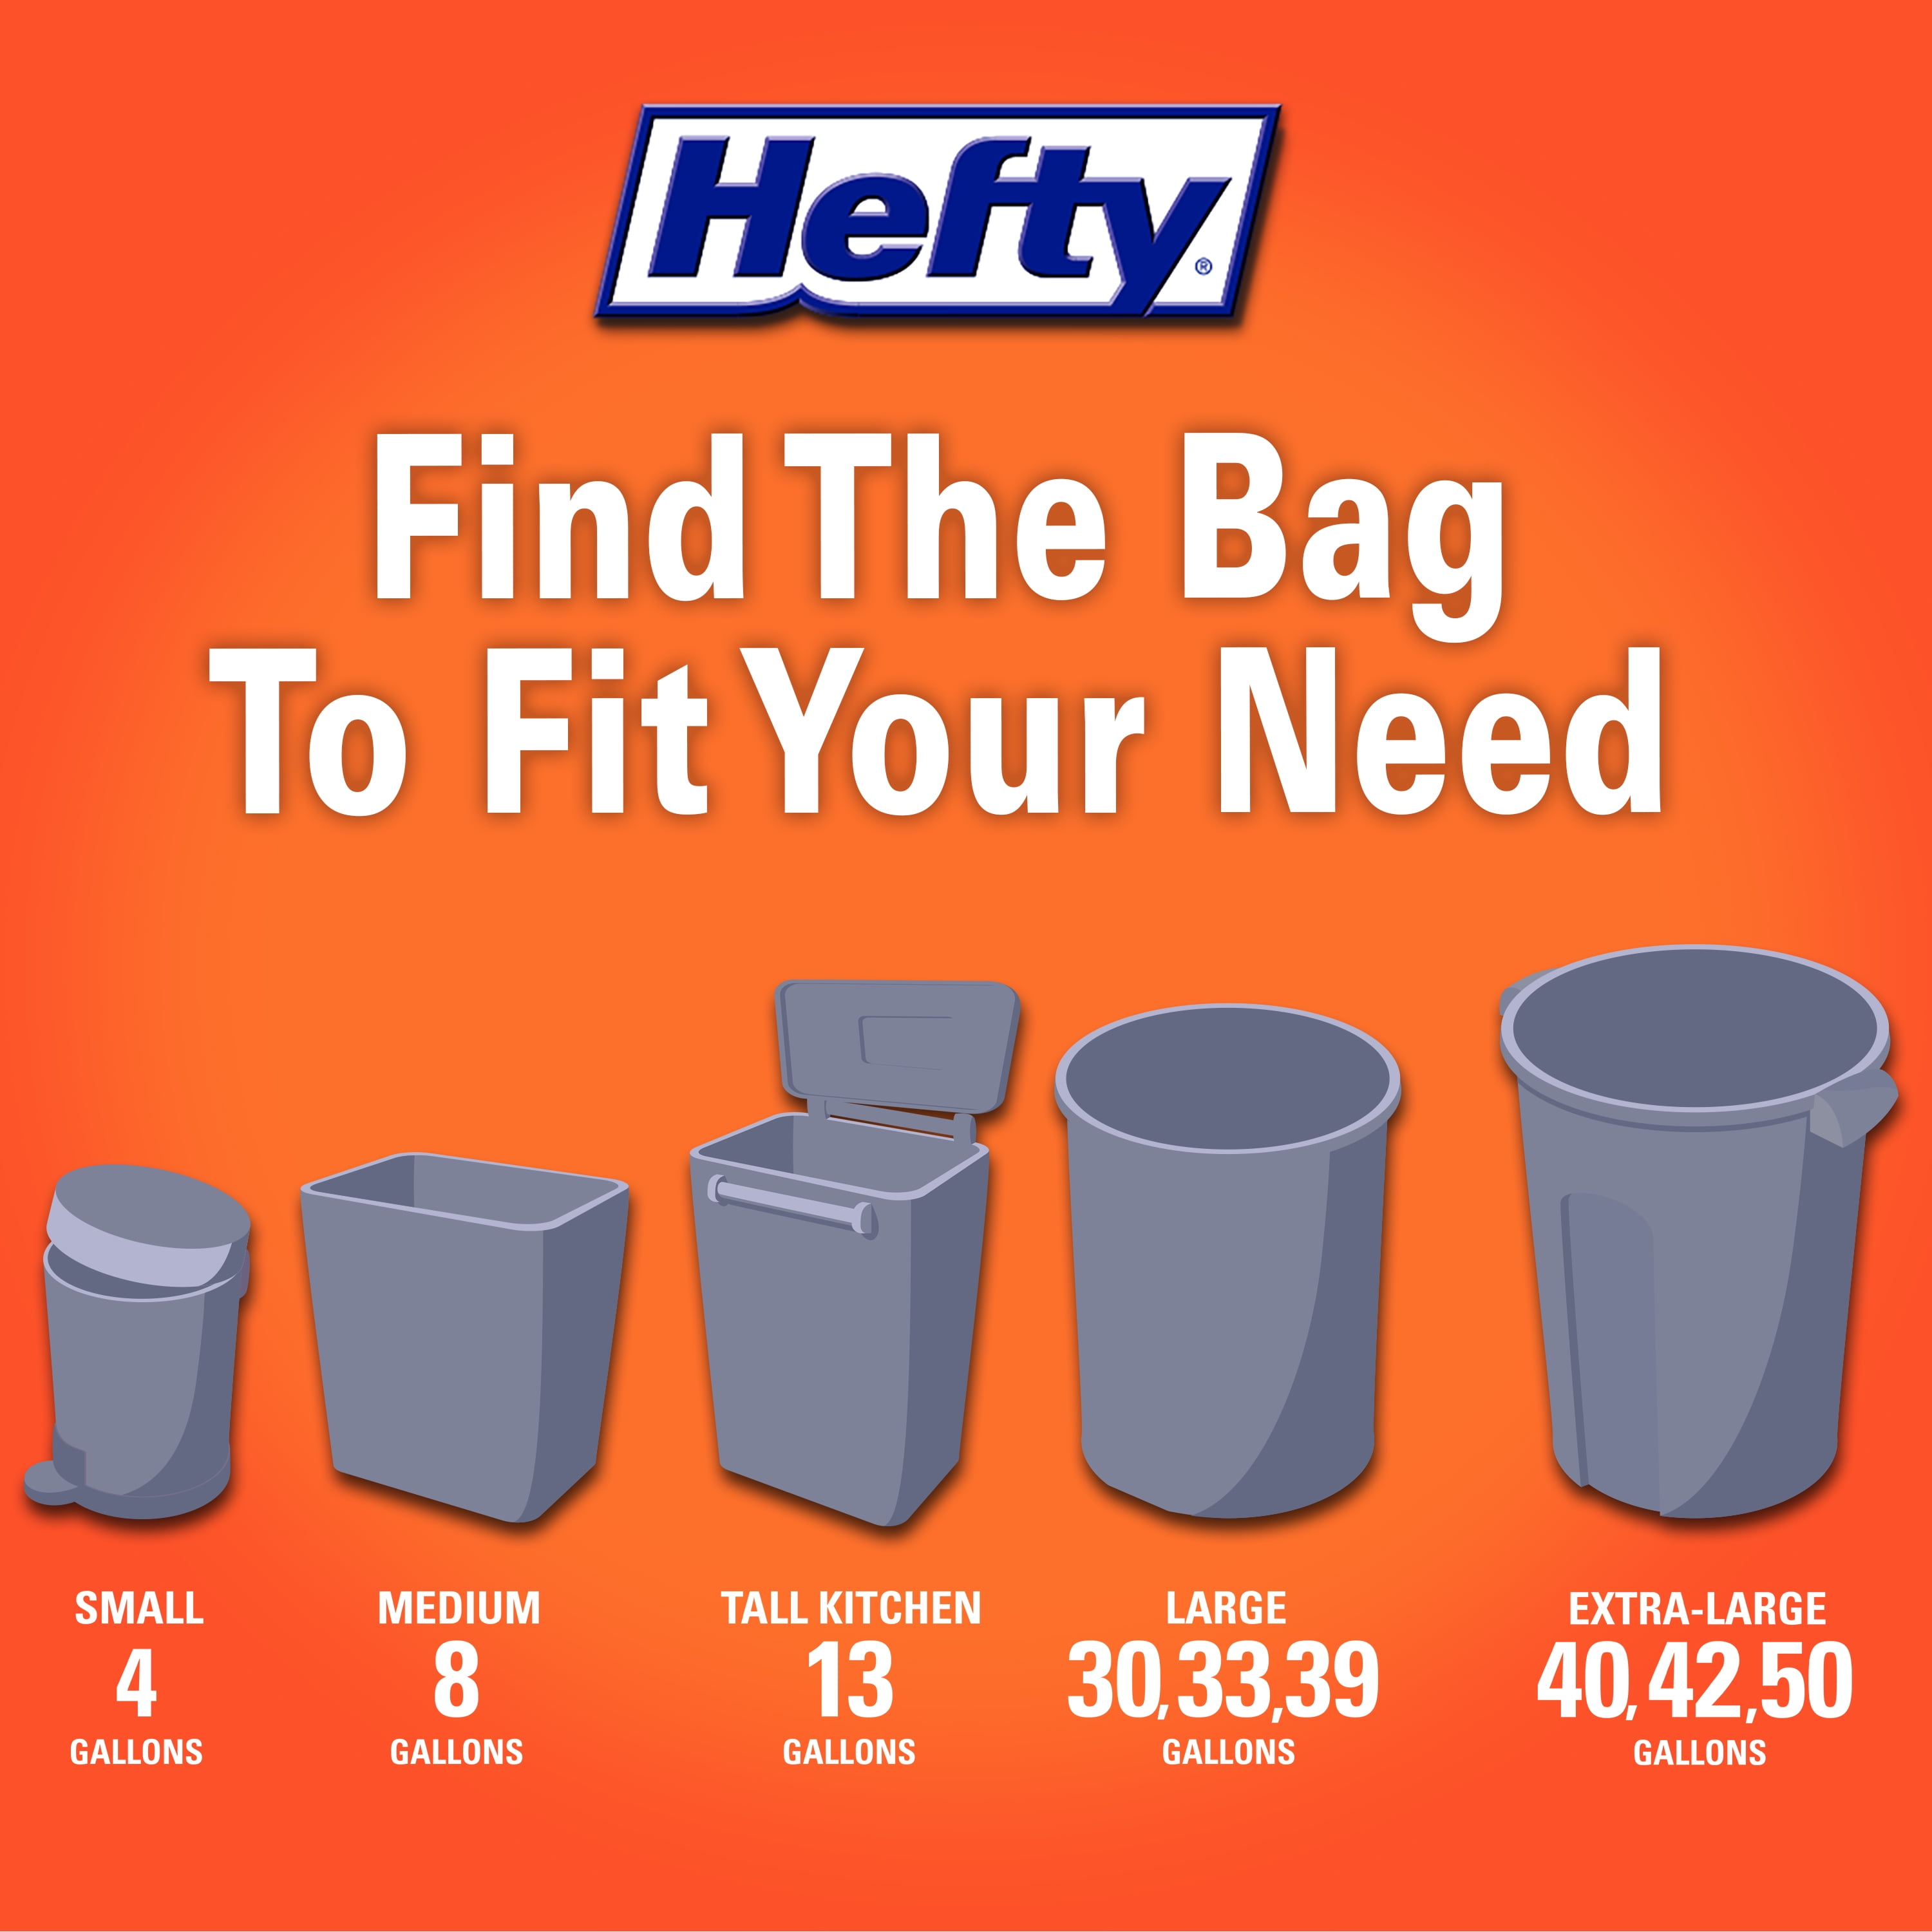 OMGGGG STOCK UP ⬆️ PRICE 😳‼️DIRECT LINK IN MY BIO ‼️GET 12 BOXES OF HEFTY  TRASH BAGS FOR ONLY $15 😳😳😳😳‼️ADD TO CART 🛒 CLIP 40% OFF COUPON…